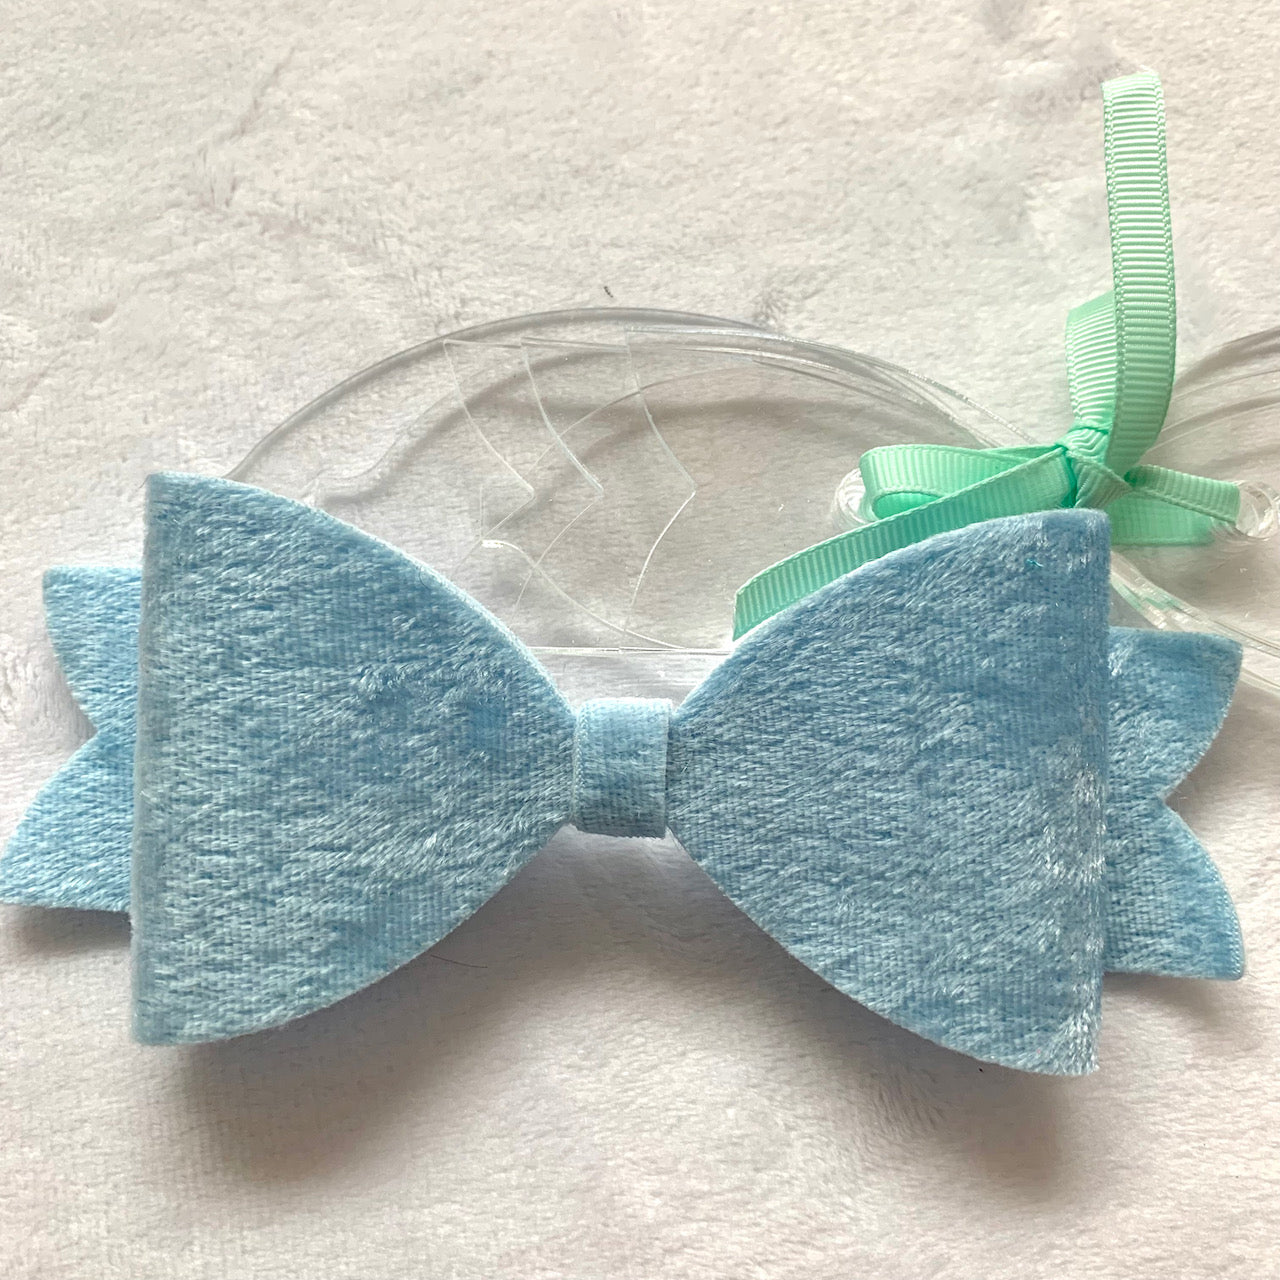 Curvy Bow Templates for making hair bows